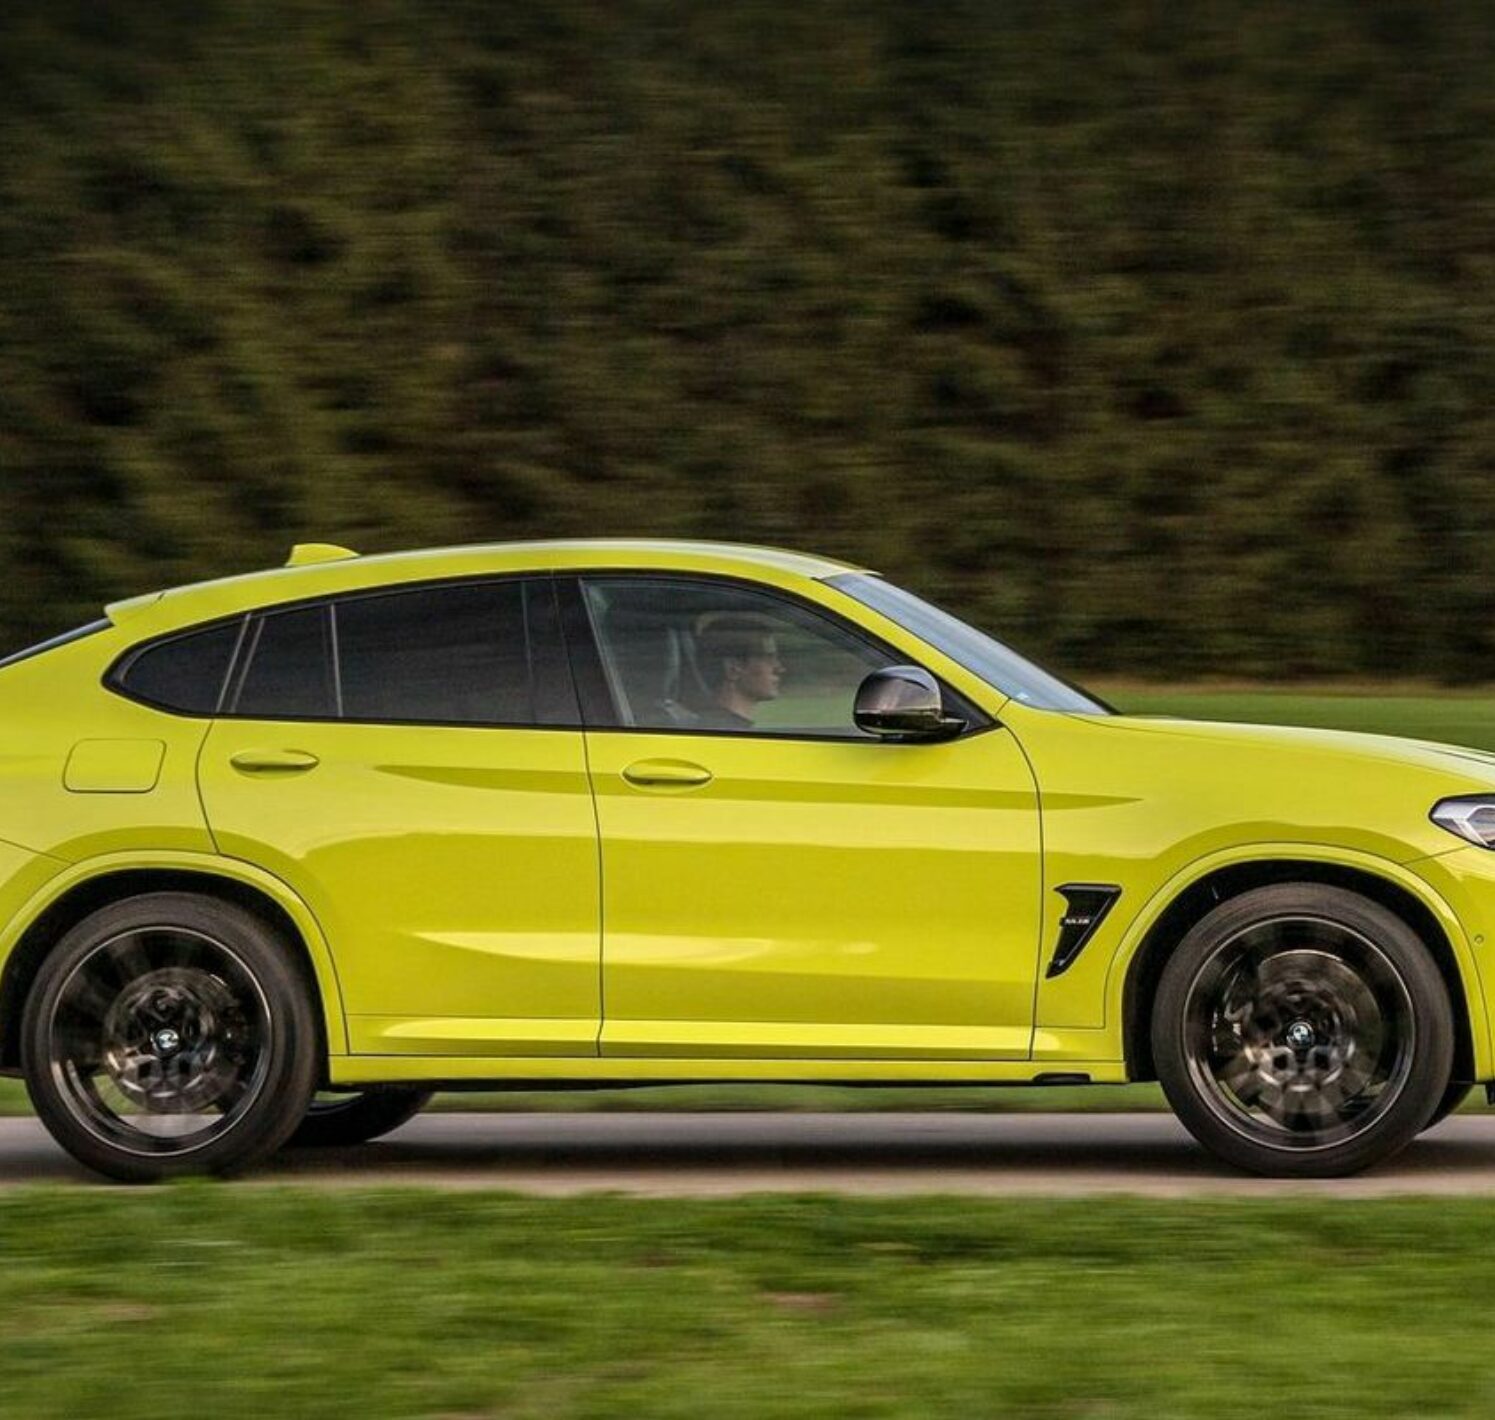 https://autofilter.sk/assets/images/x4-m/gallery/bmw-x4-m-competition-2022_01-galeria.jpg - obrazok